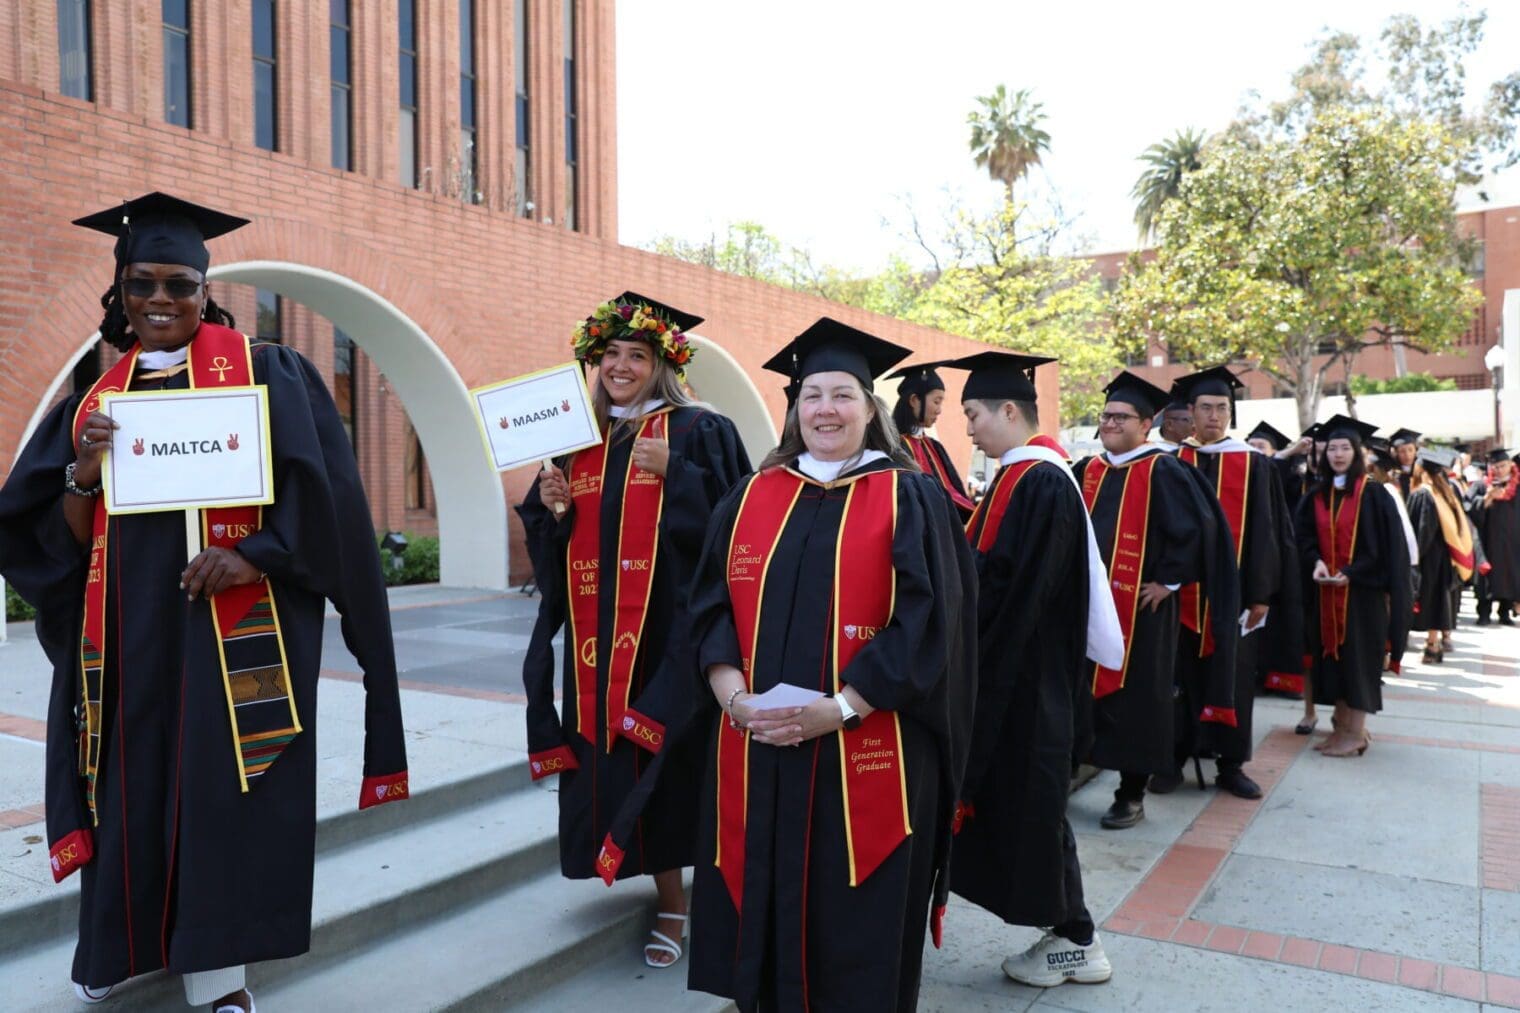 Line of students in commencement robes and caps, with two of them at the front holding signs that depict the degrees they are graduating with. One says "MALTA" and the other says "MASAM."